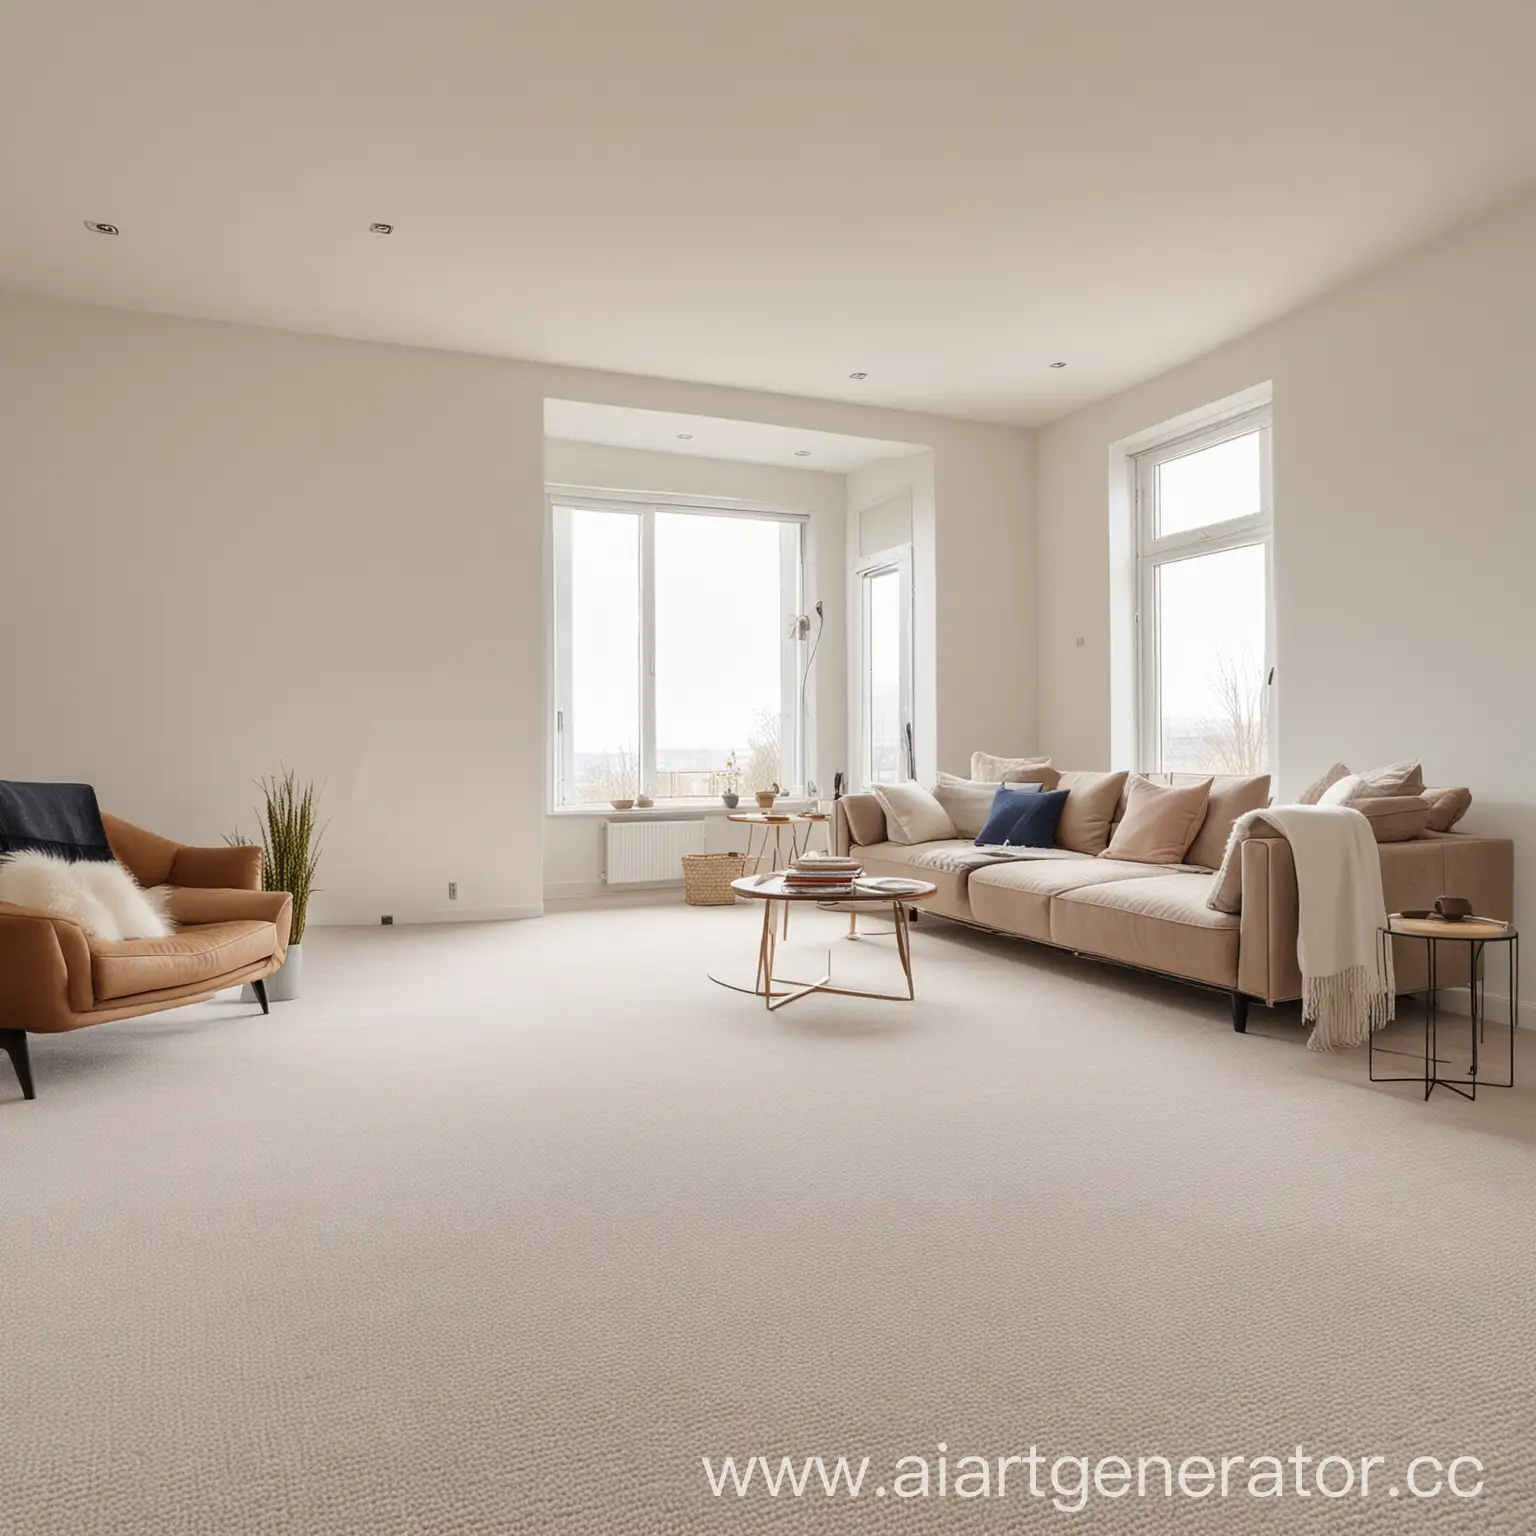 Cozy-Interior-Scene-with-Soft-Carpet-Illuminated-by-Natural-Light